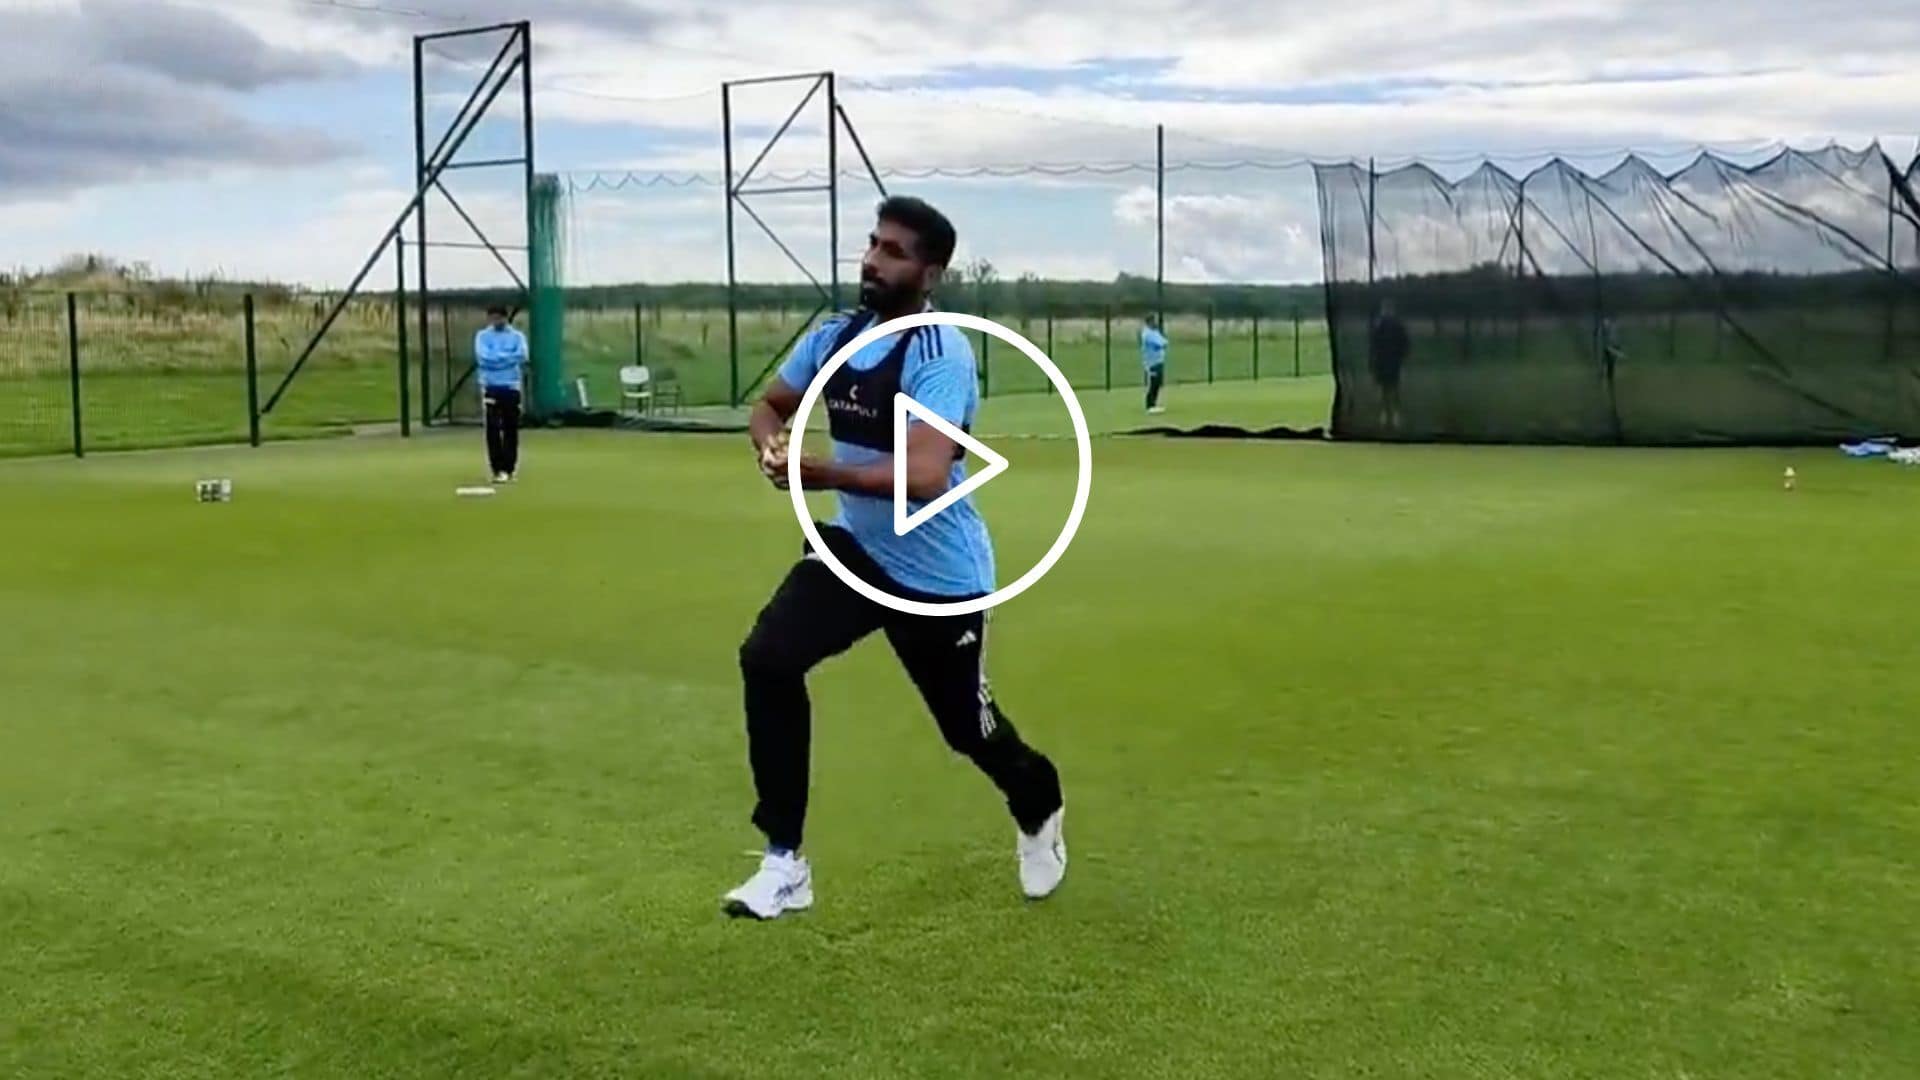 [Watch] Jasprit Bumrah Delivers Deadly Bouncers And Yorkers At Nets Ahead of Ireland Series